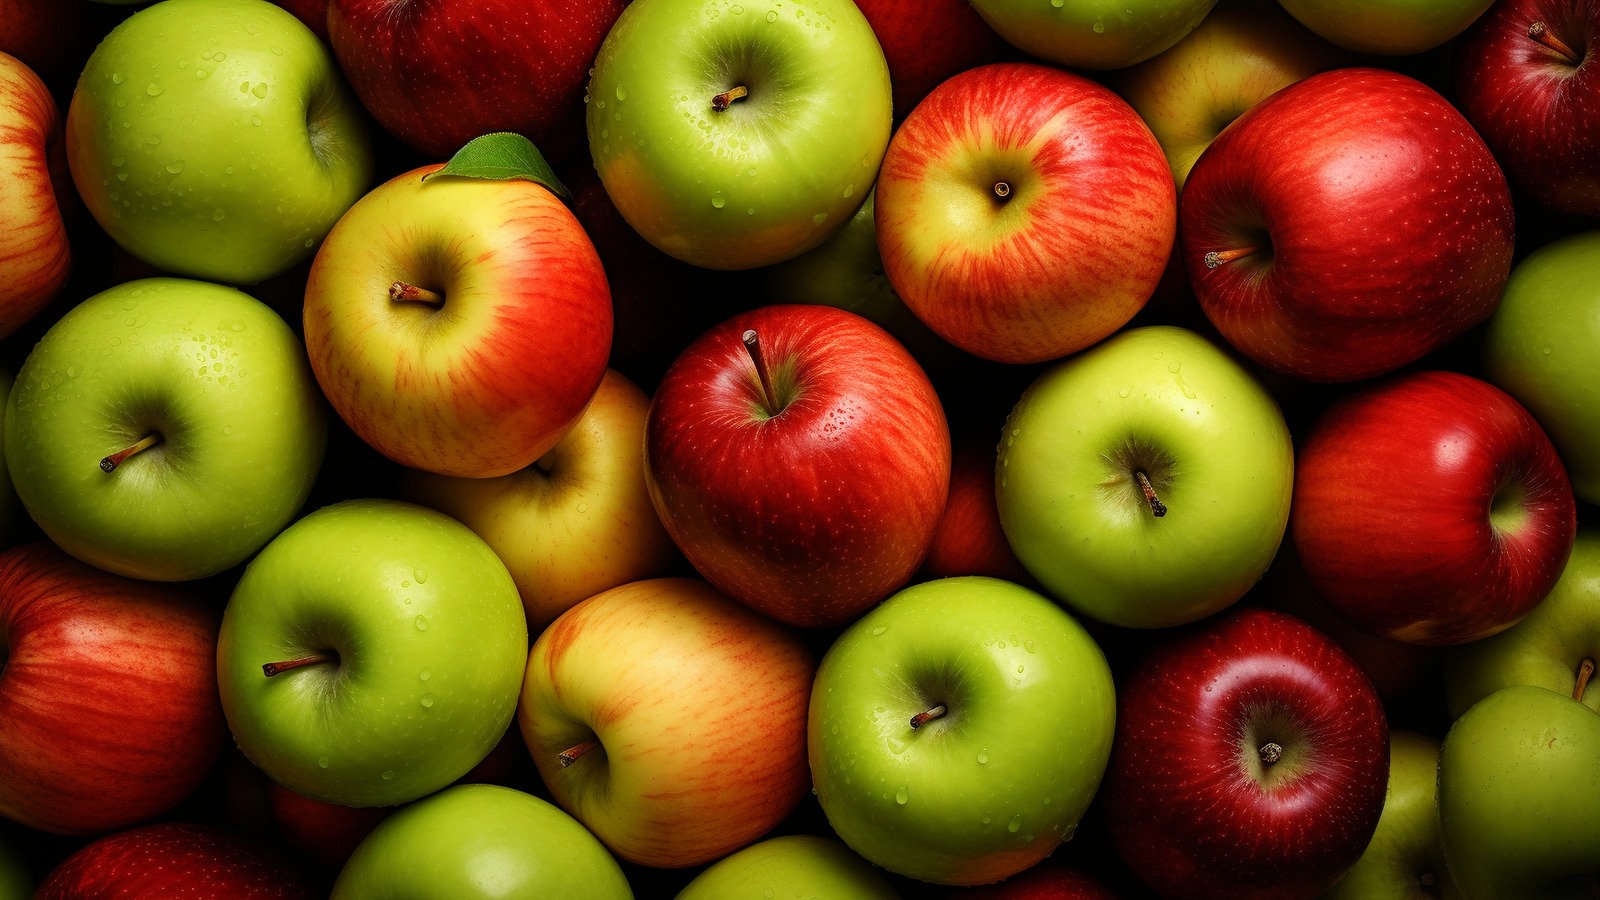 https://www.thedailymeal.com/img/gallery/the-best-way-to-measure-how-many-apples-are-in-a-pound-without-a-scale/l-intro-1699387645.jpg